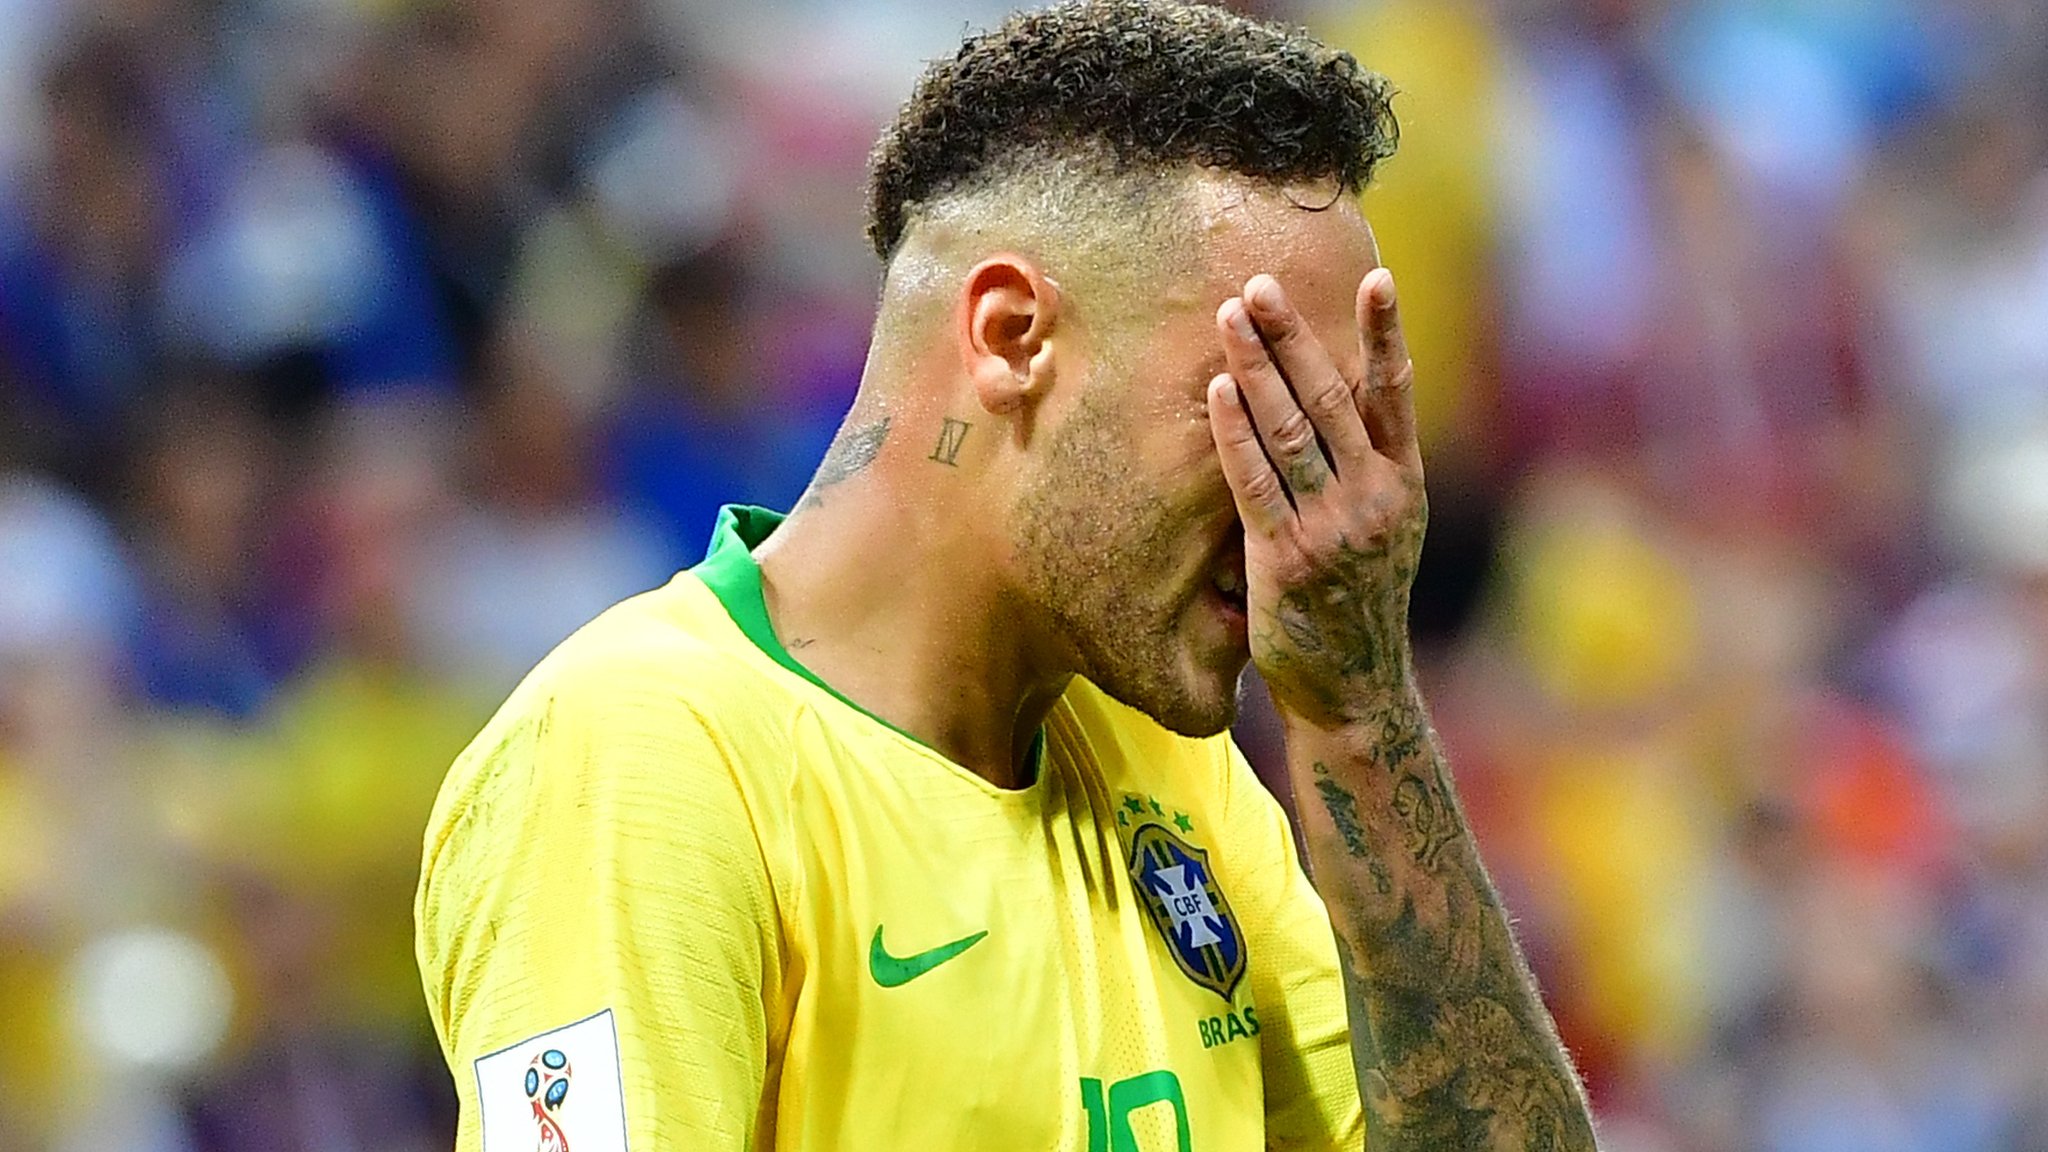 Neymar was in 'mourning' after World Cup exit